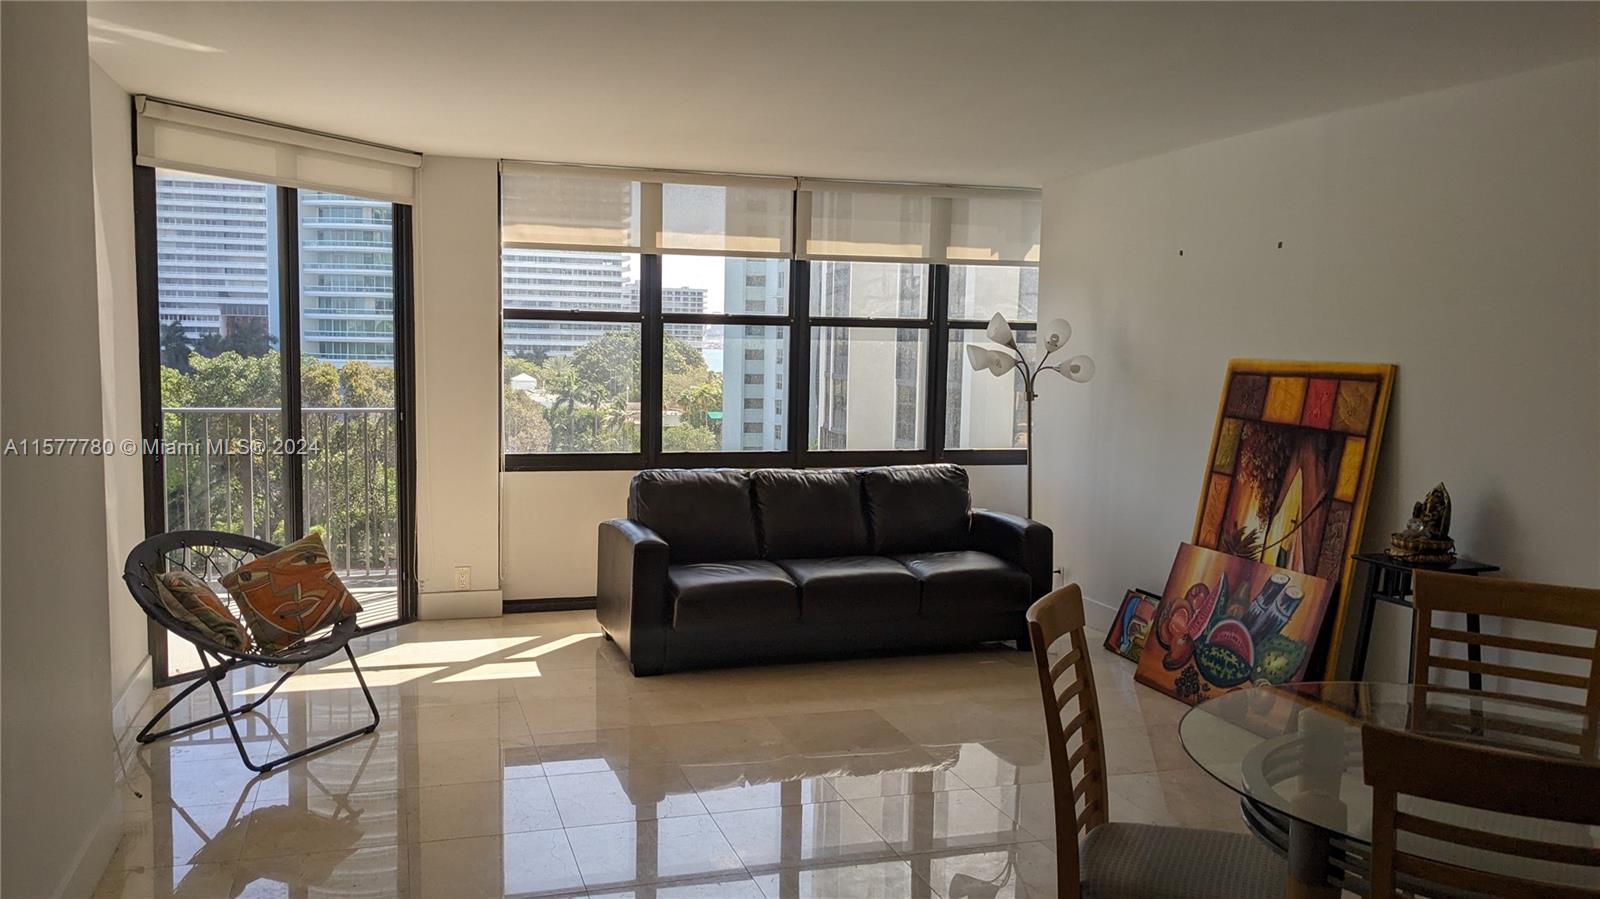 Beautiful unit in the desirable Brickell Place, located on the beautiful landscaped Brickell Ave.  2/2 Spacious and totally remodeled. Open kitchen, with quartz counter top and stainless steel appliances. Marble floor throughout.  Washer and dryer inside the unit. Lots of storage. One covered parking. The building features  security 24-7, swimming pool, gym, tennis courts, children park, toddler room, Bbq area and marina with boat deck.  Close to restaurants, supermarkets, pharmacies and Brickell City Center.  Easy to show.